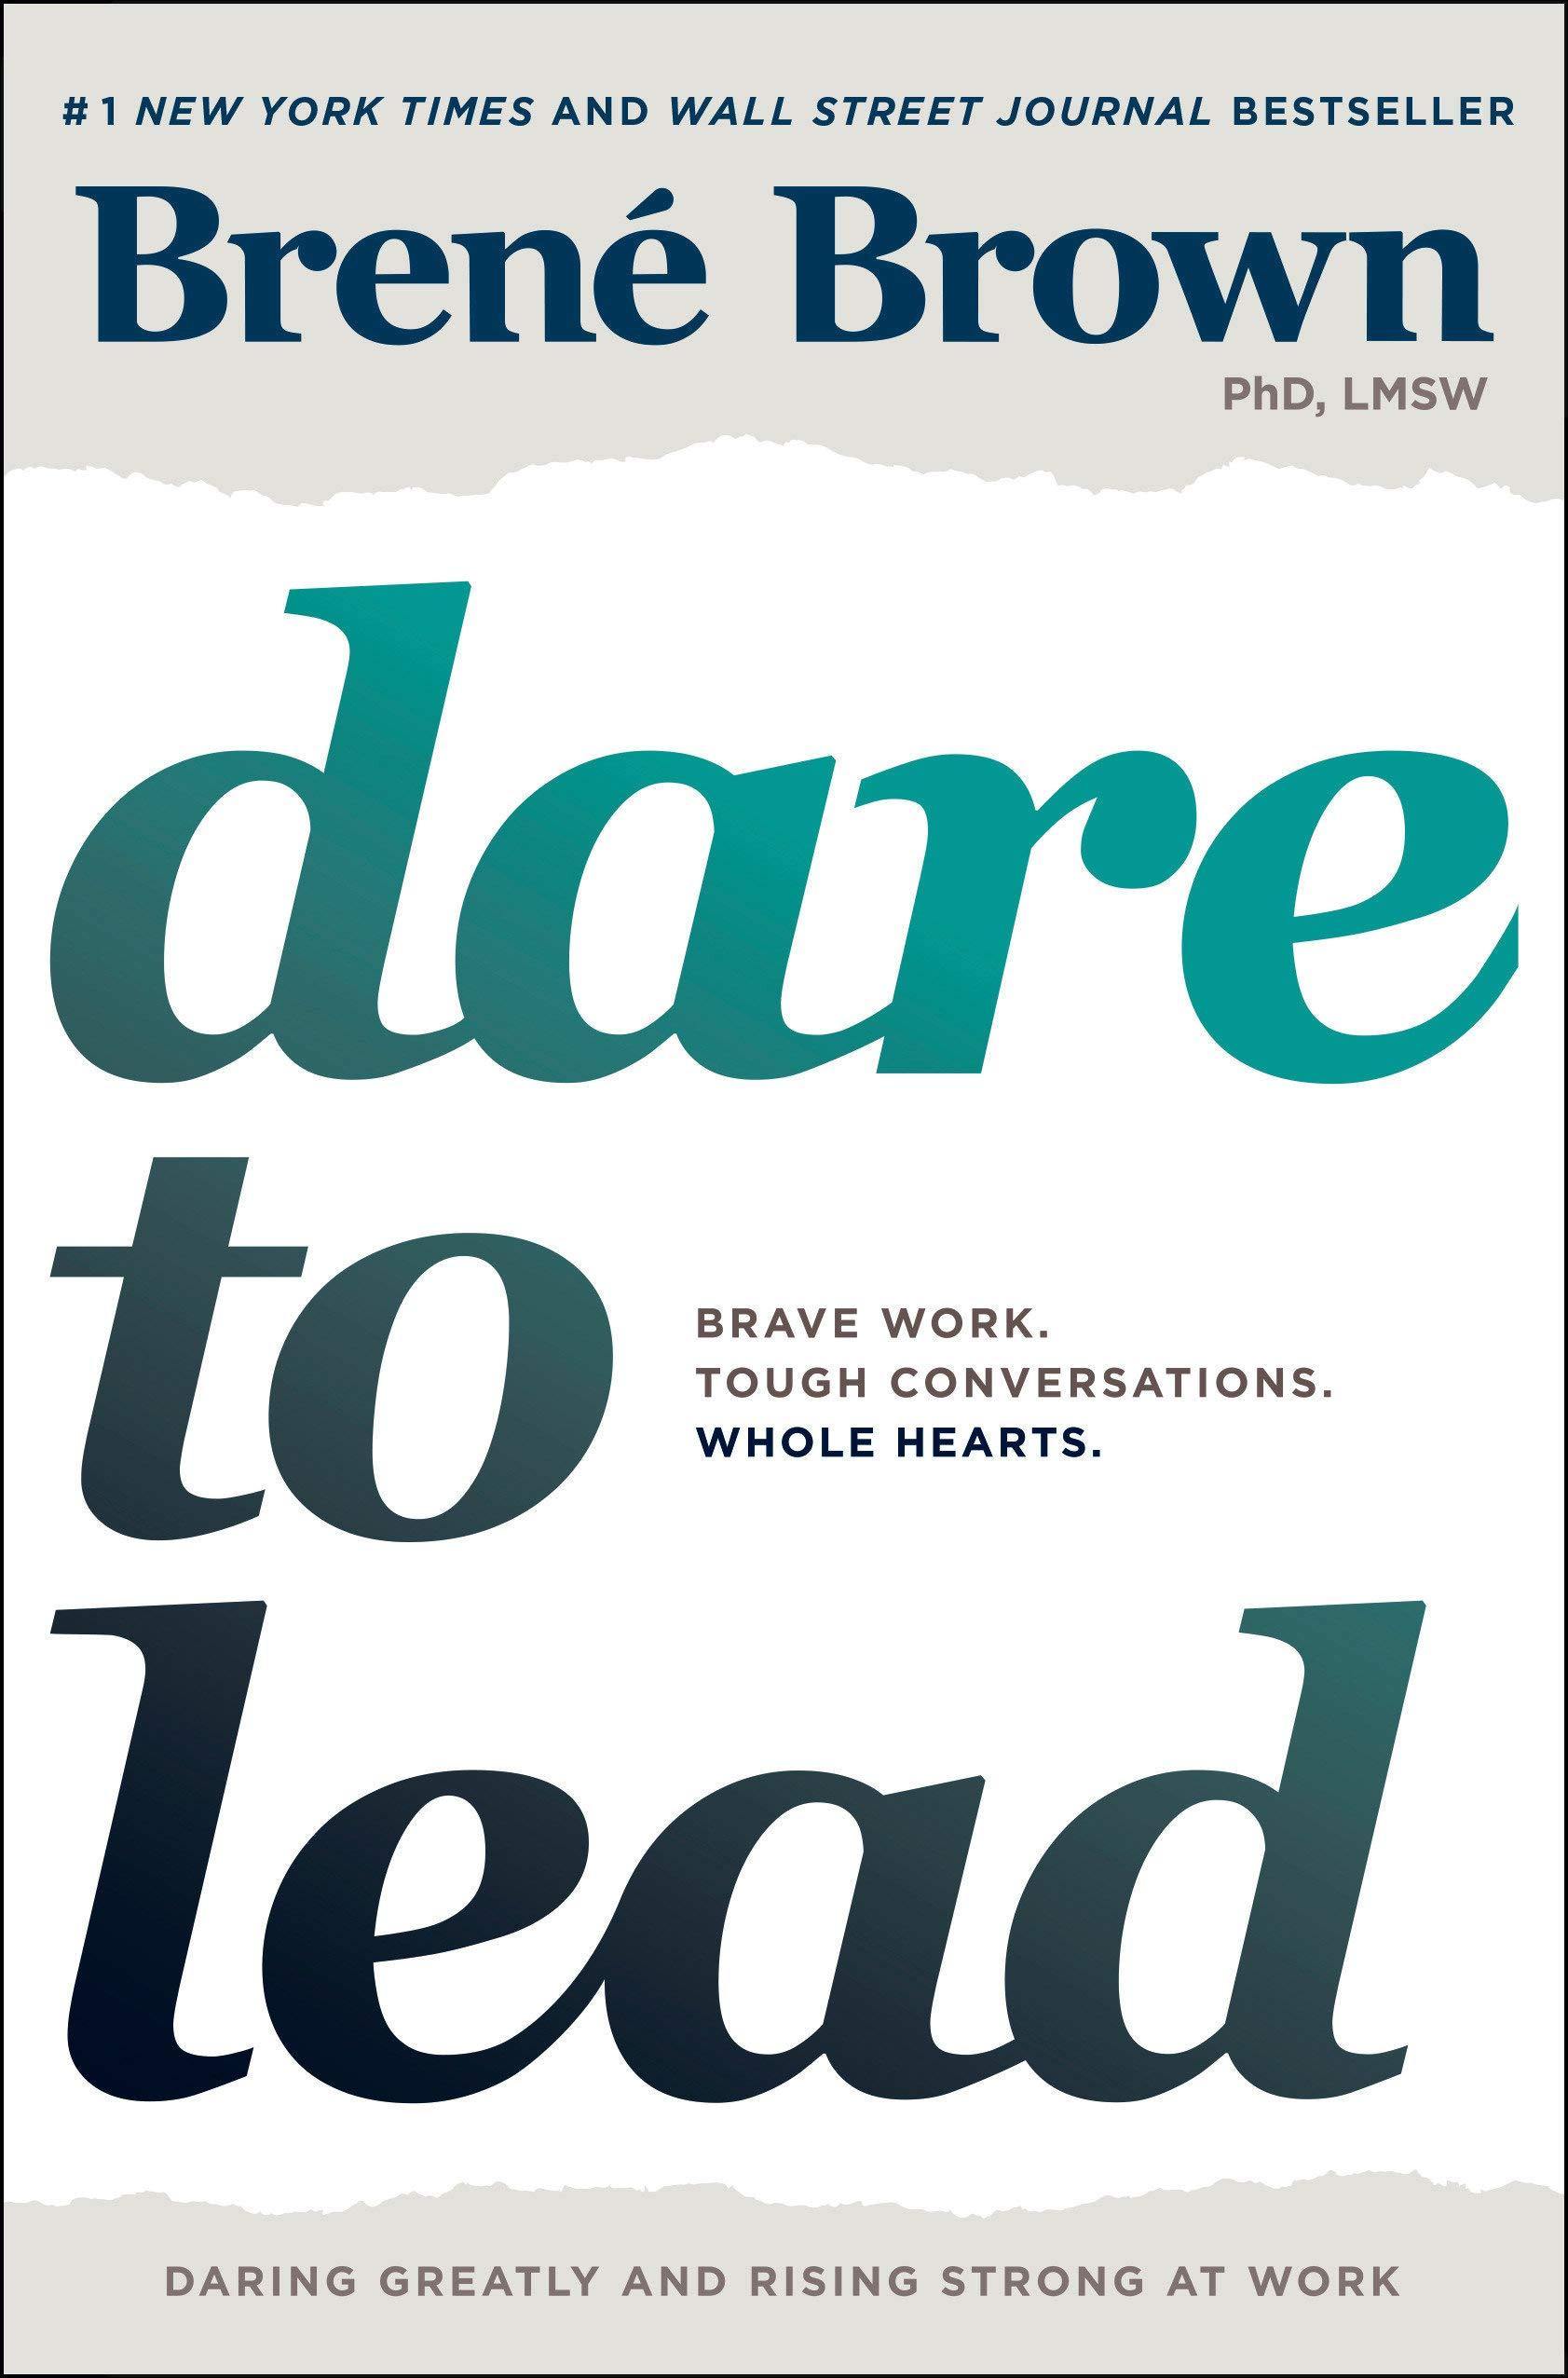 Brene　Whole　Dare　by　Brave　B　Conversations.　to　Tough　Work.　Lead:　Hearts